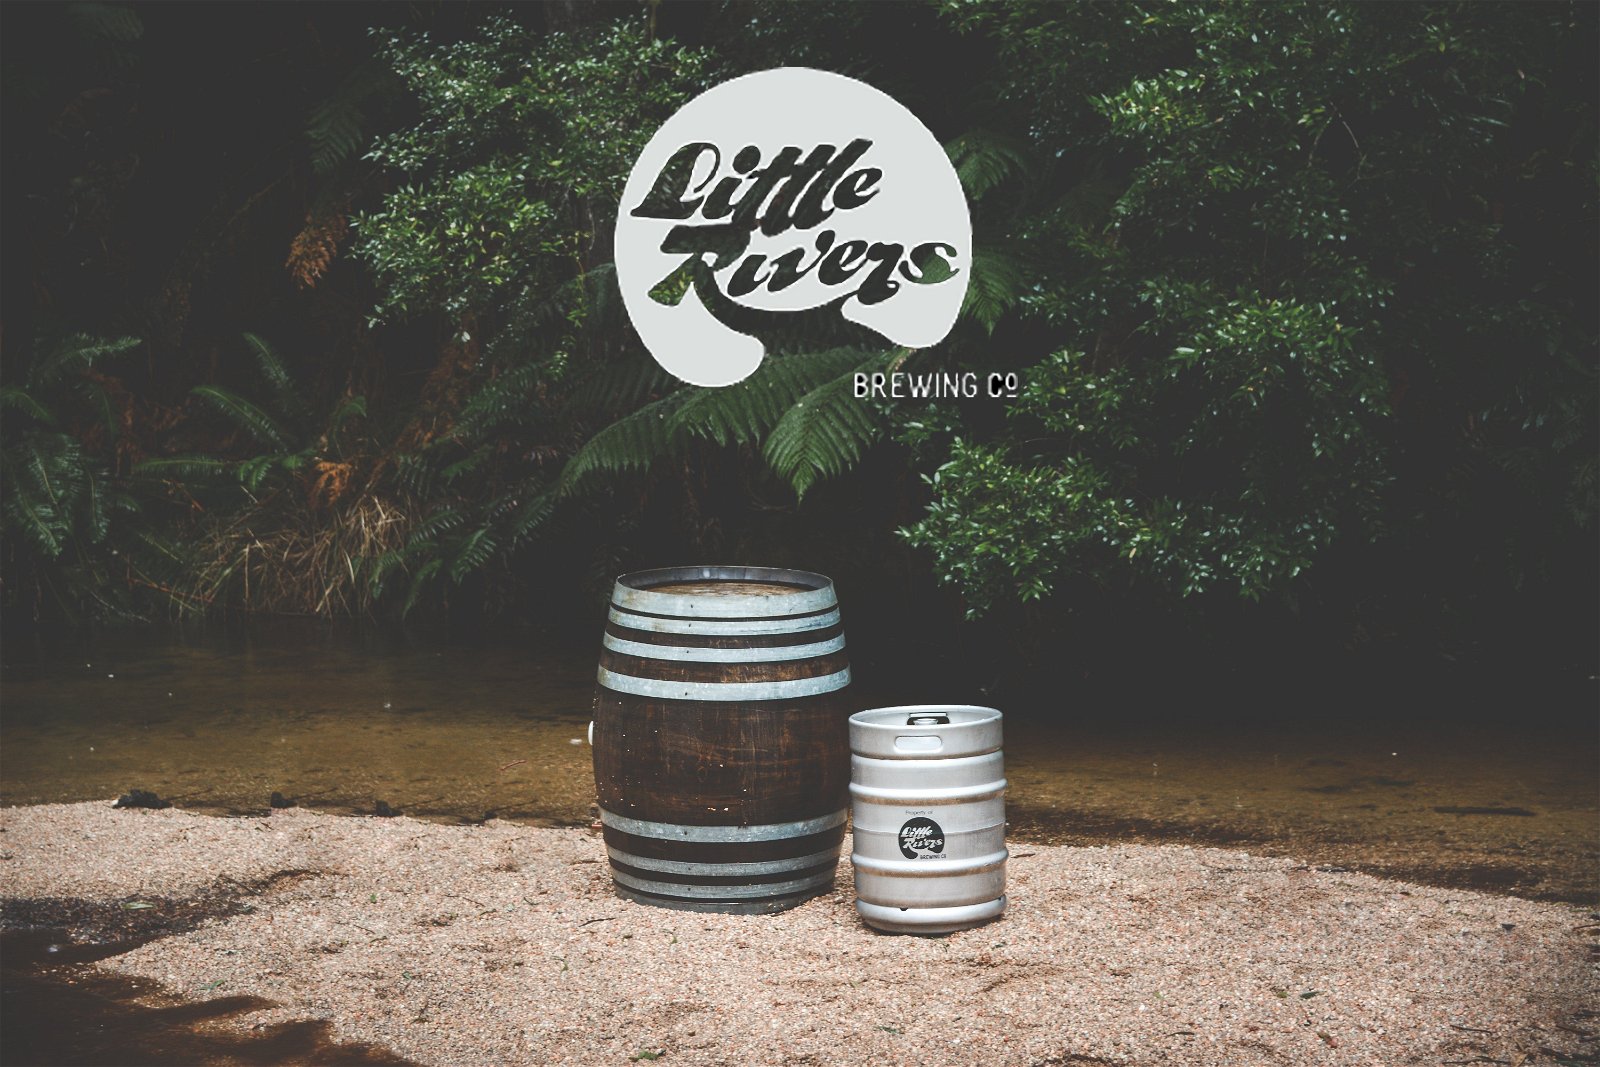 Little Rivers Brewing Co.